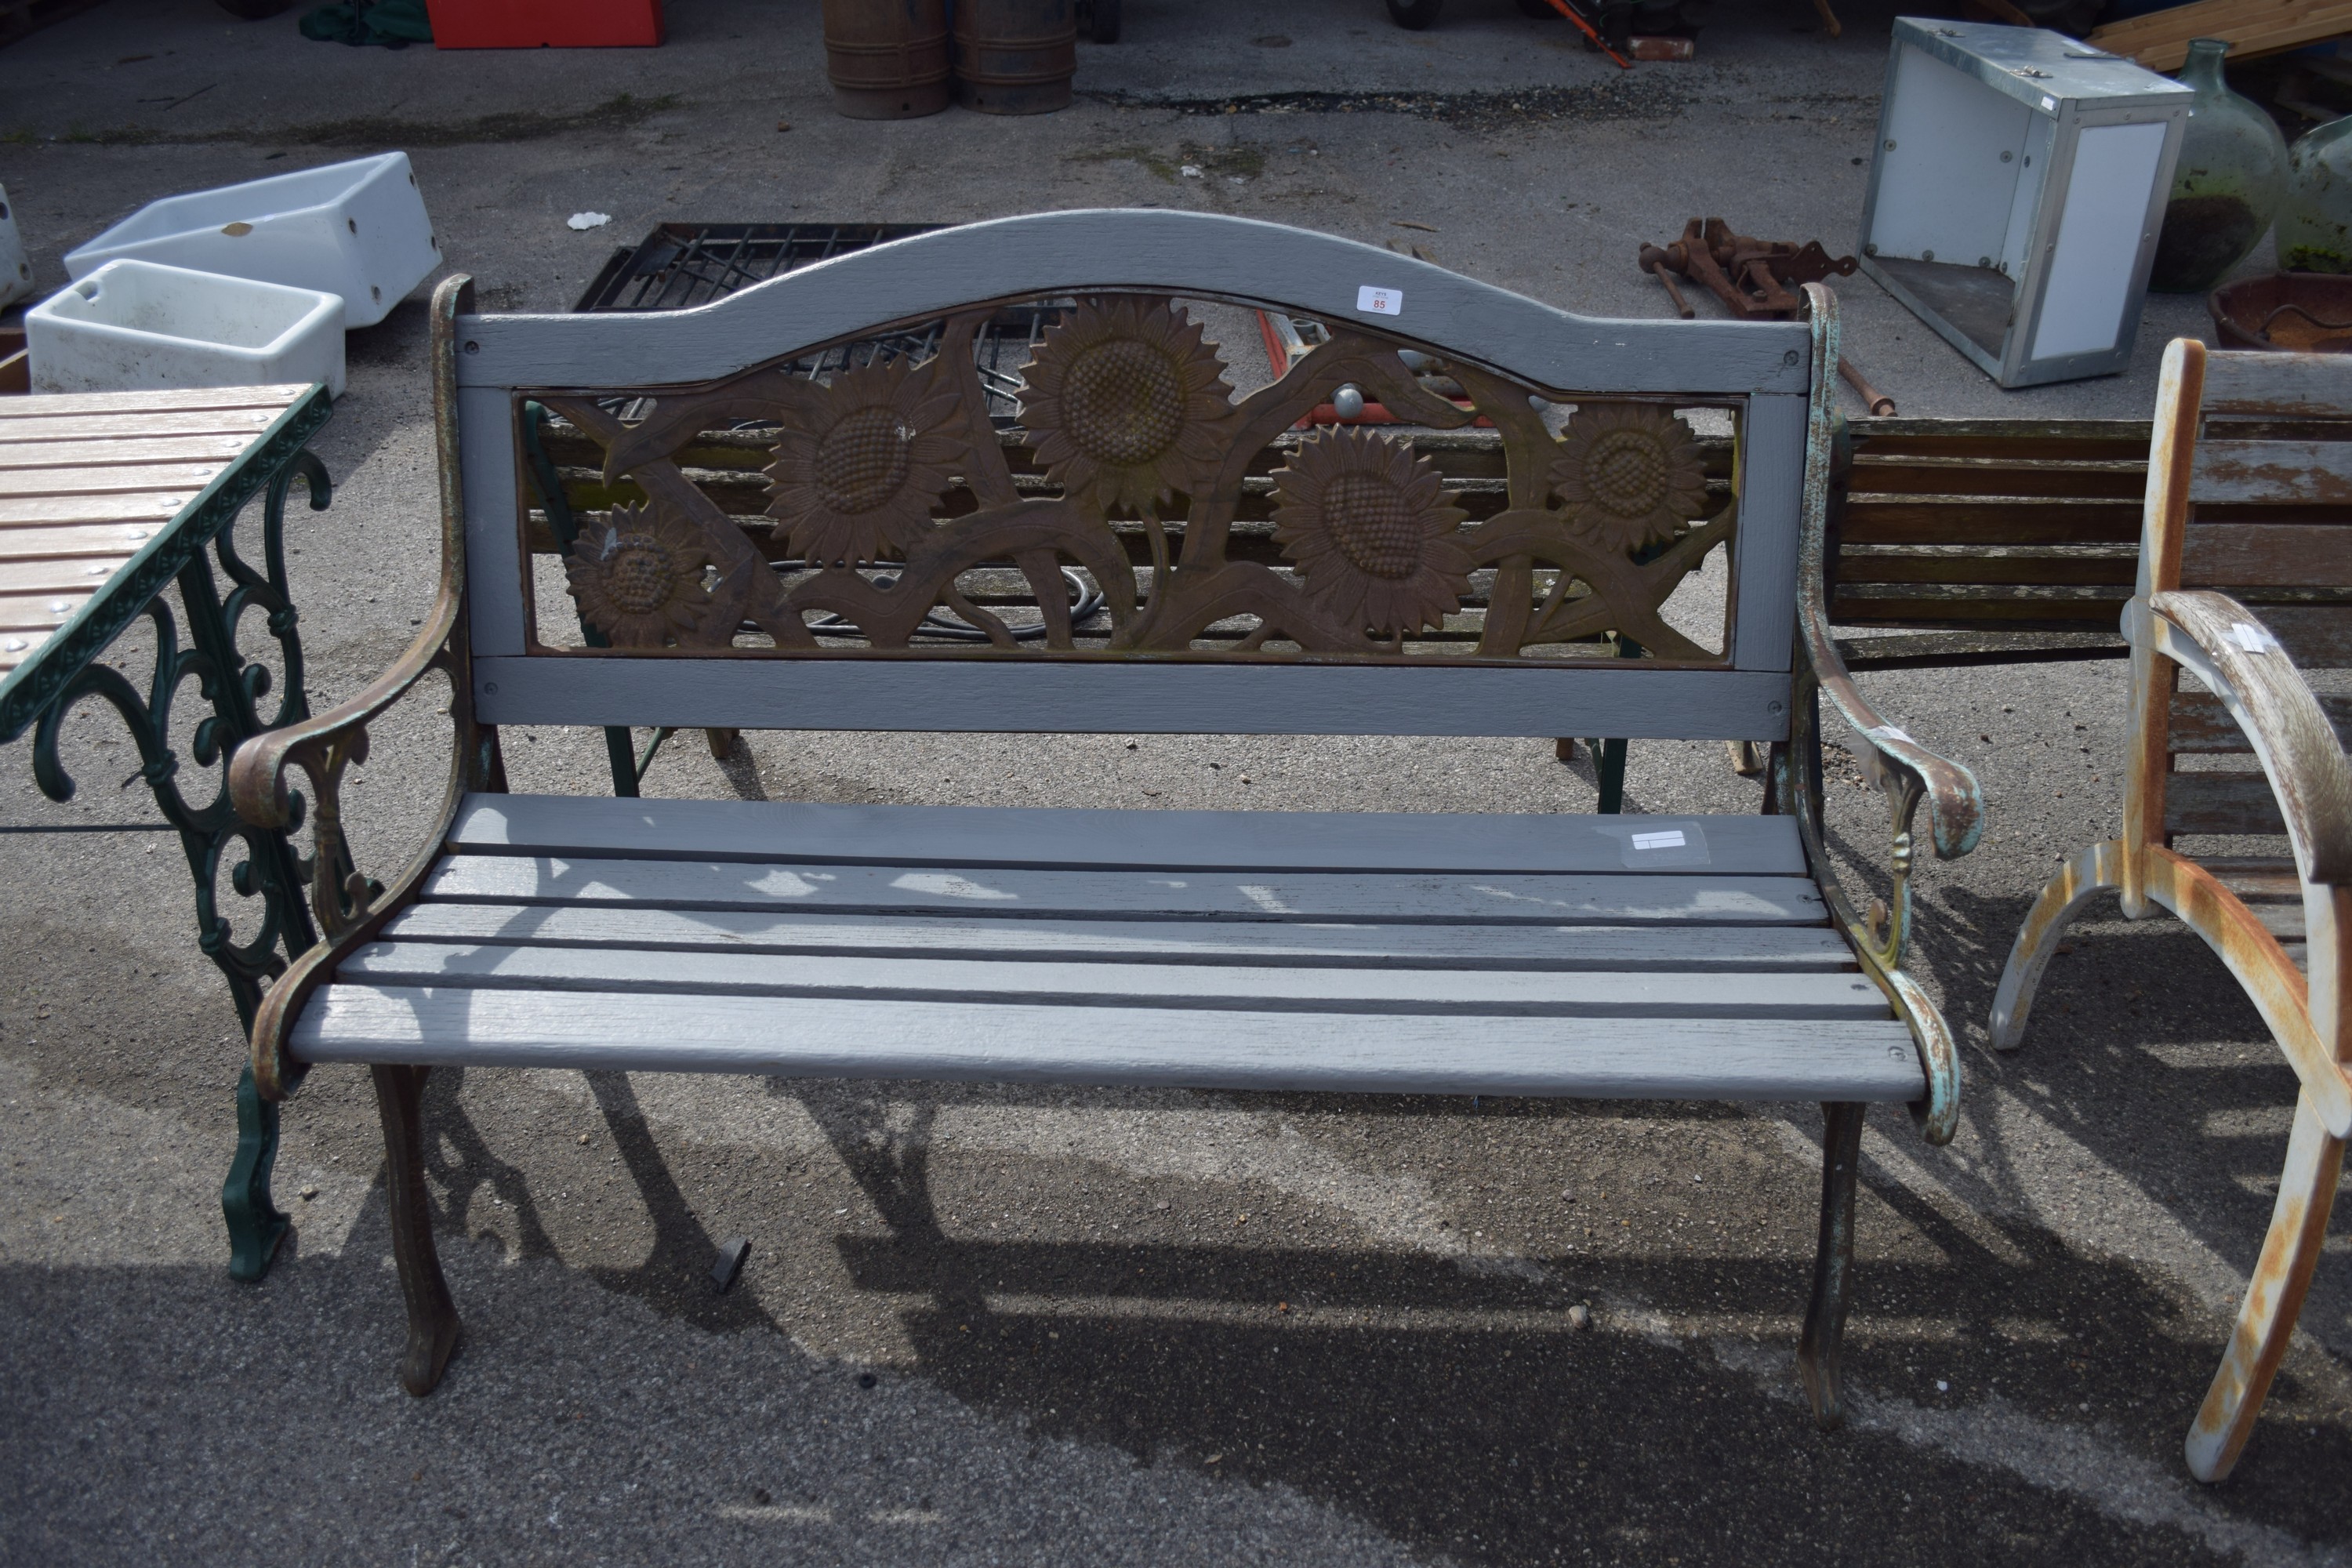 METAL AND WOOD GARDEN BENCH WITH DECORATIVE BACK MOULDED AS SUNFLOWERS